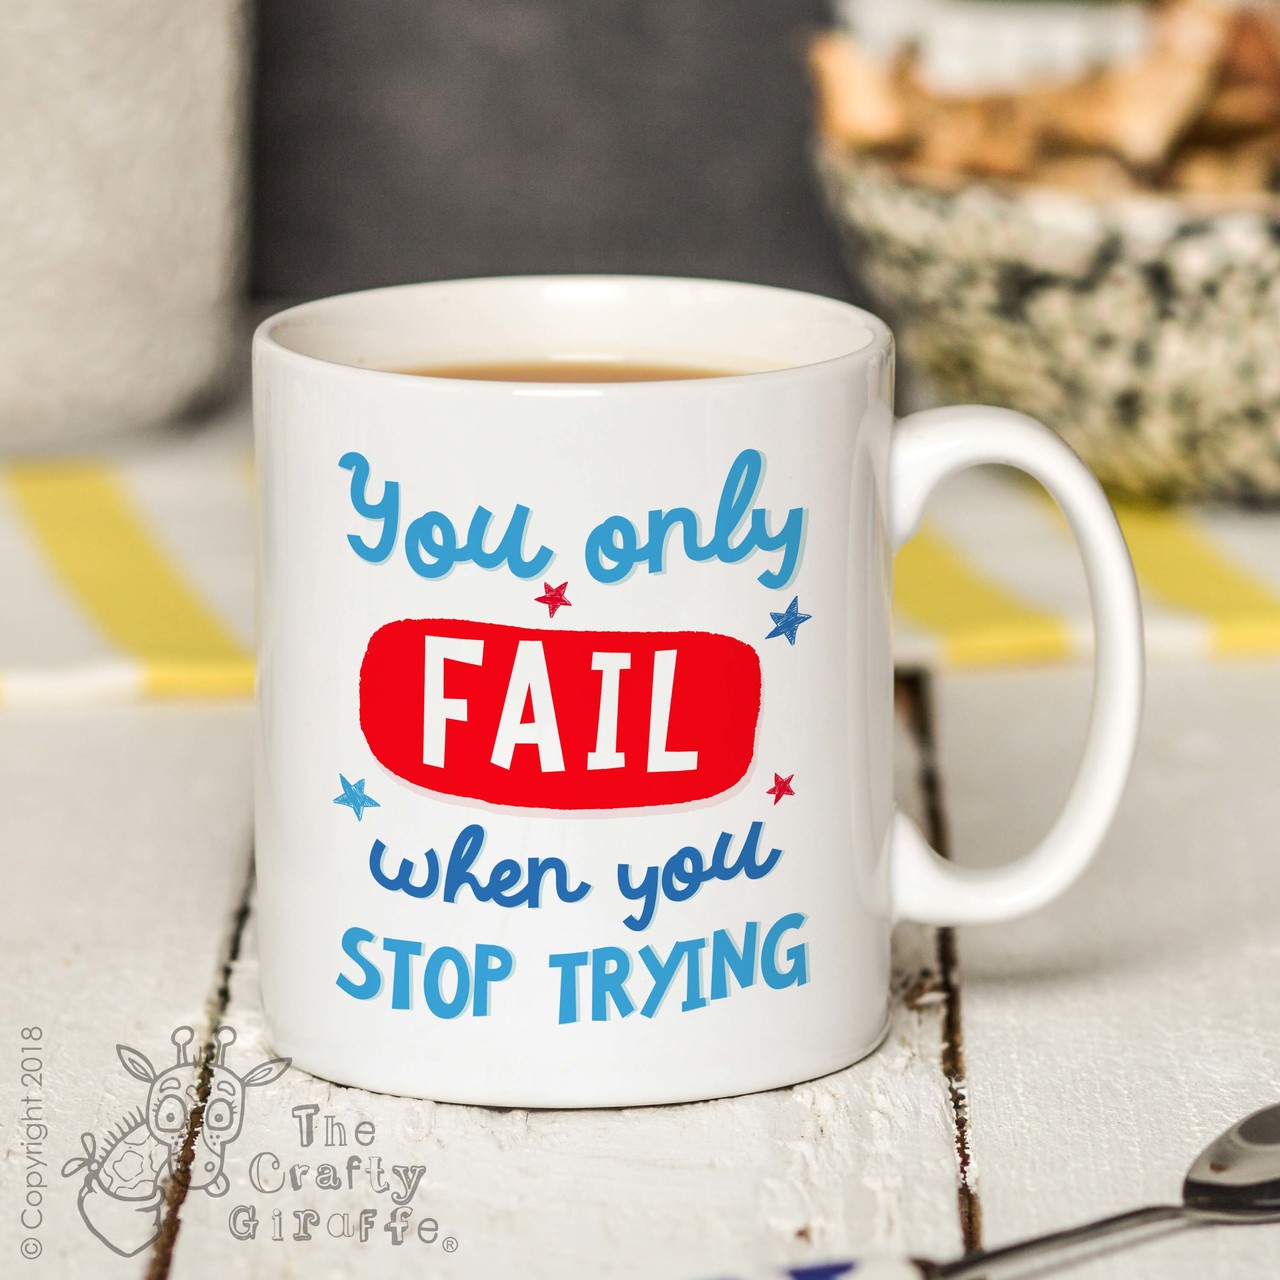 You only fail when you stop trying Mug